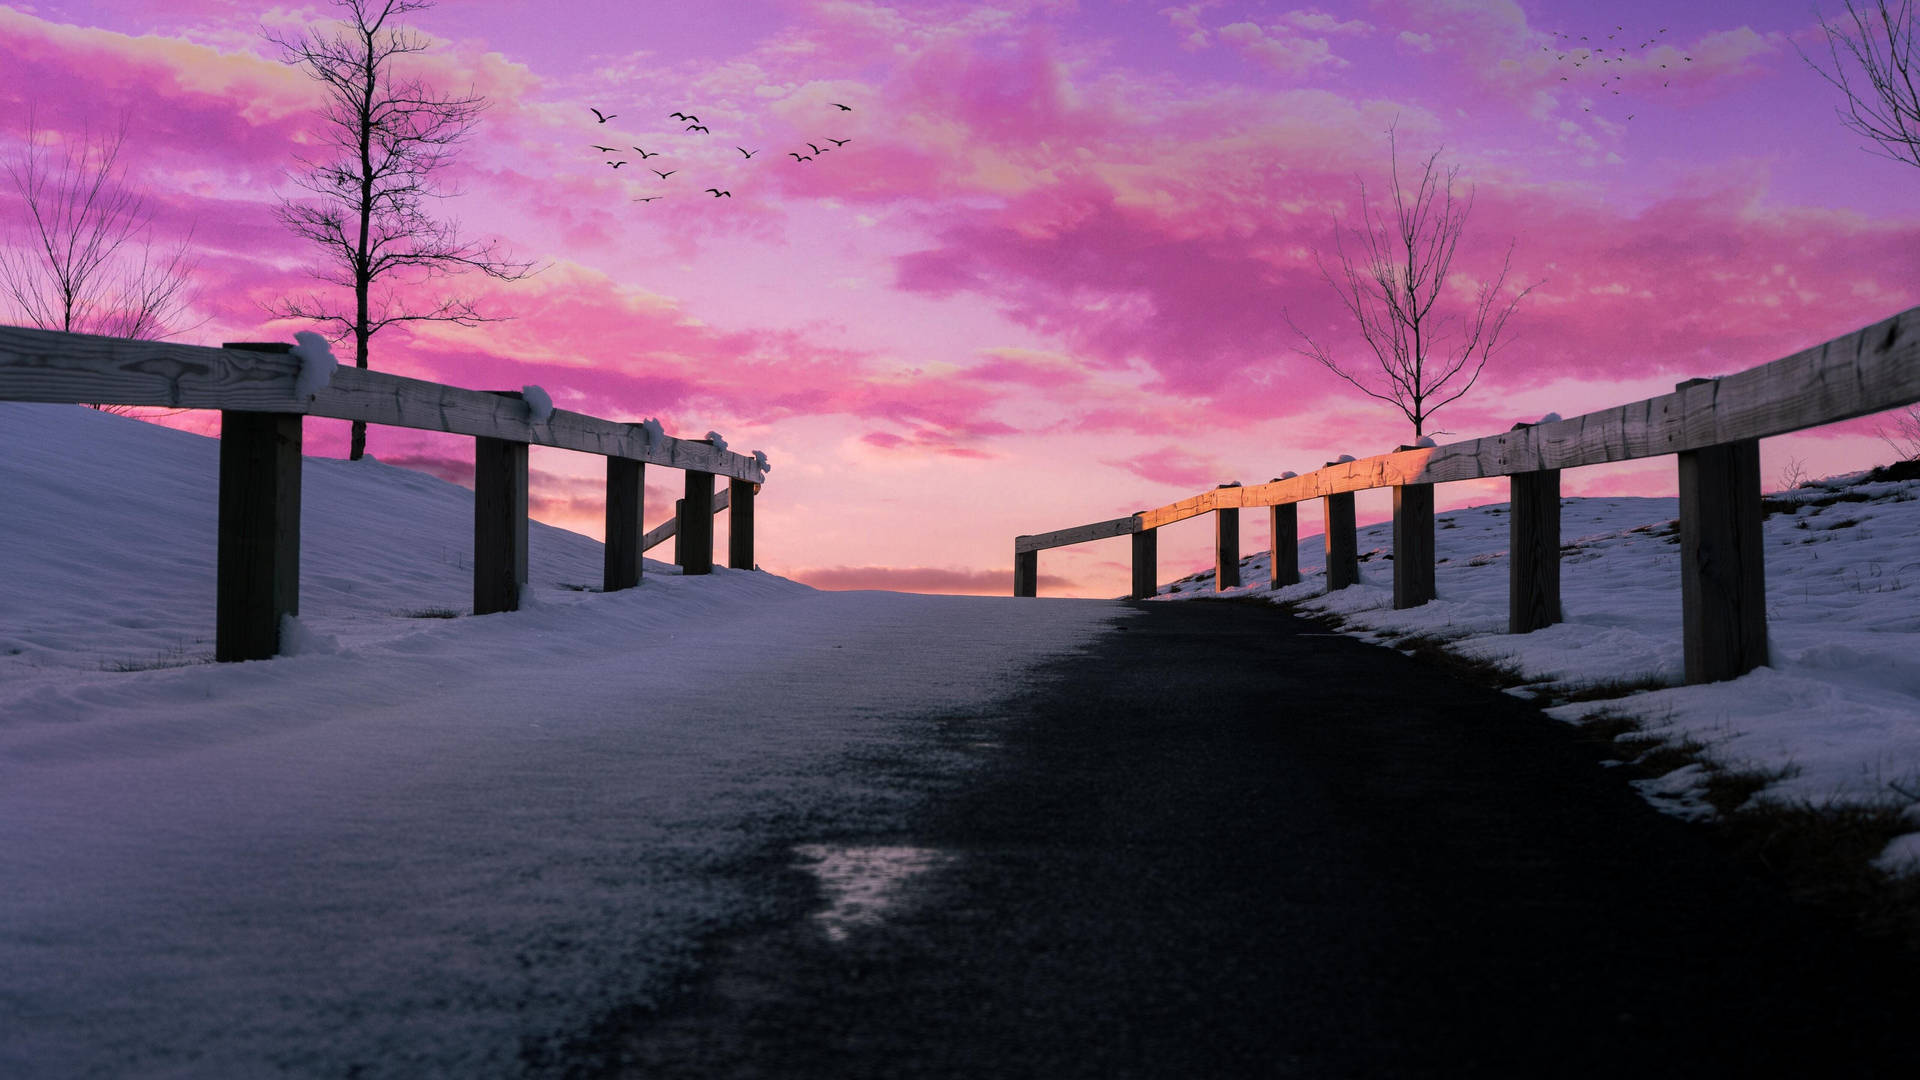 Icy Pavement With Pink Sky Aesthetic Mac Wallpaper